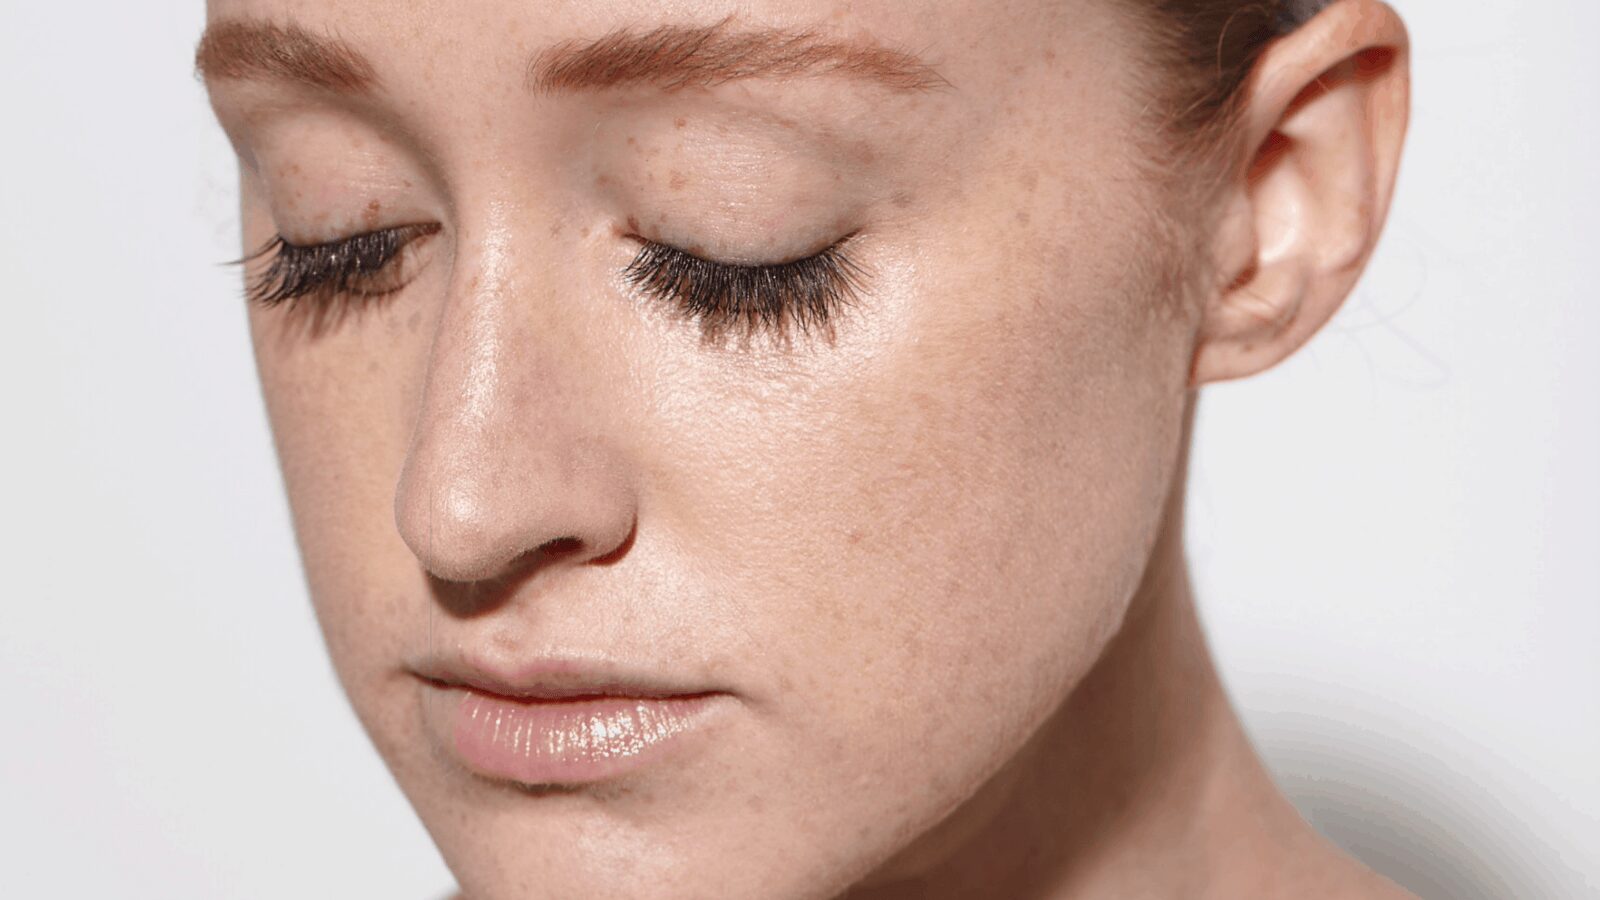 How Redheads Can Prevent Acne & Pimples: 4 Tips to Avoid Breakouts